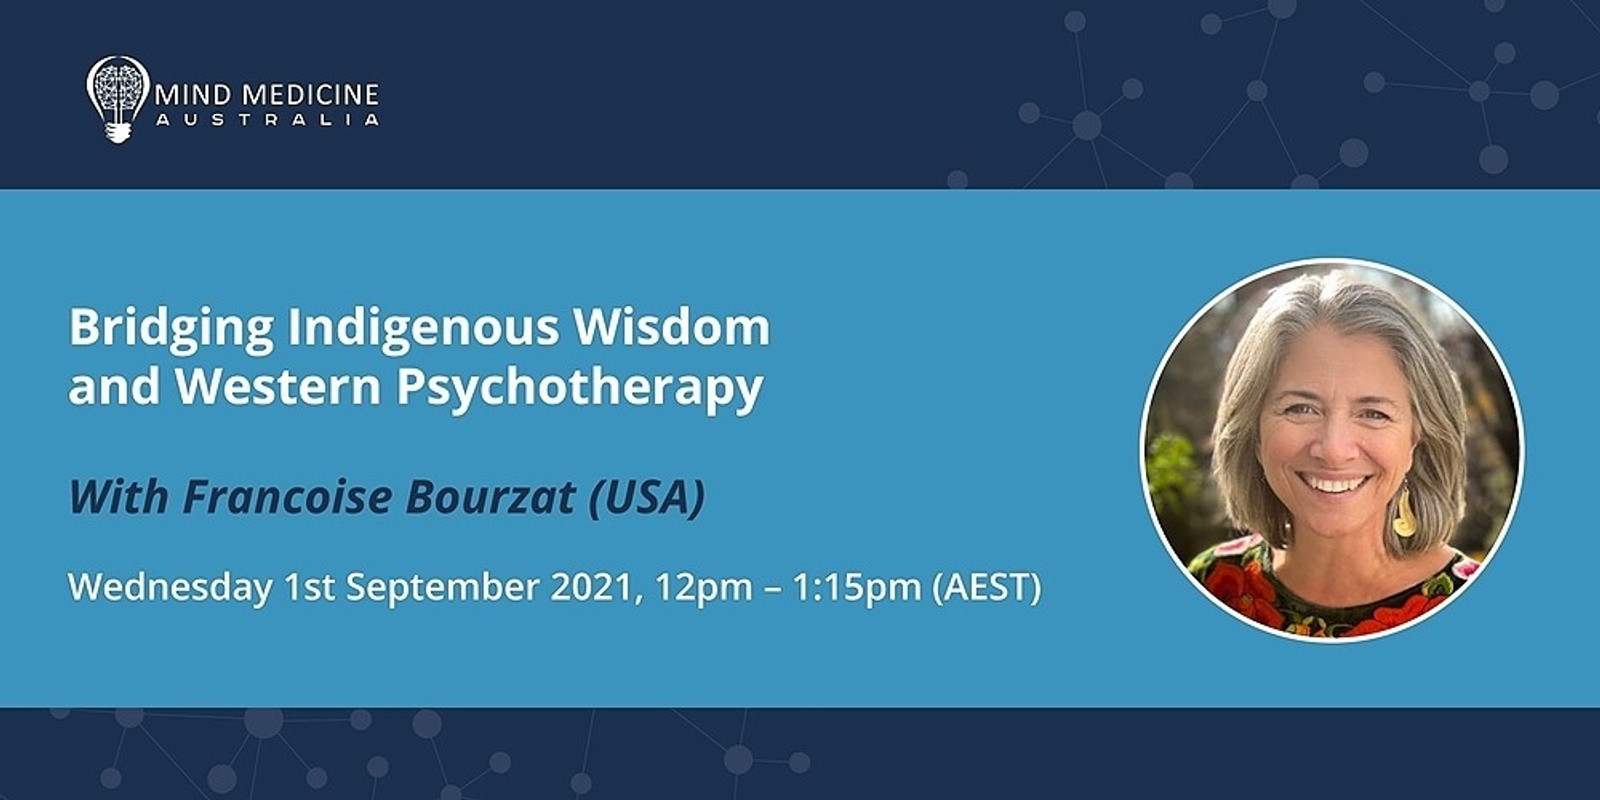 Banner image for FREE WEBINAR: Bridging Indigenous Wisdom and Western Psychotherapy - Francoise Bourzat (USA)